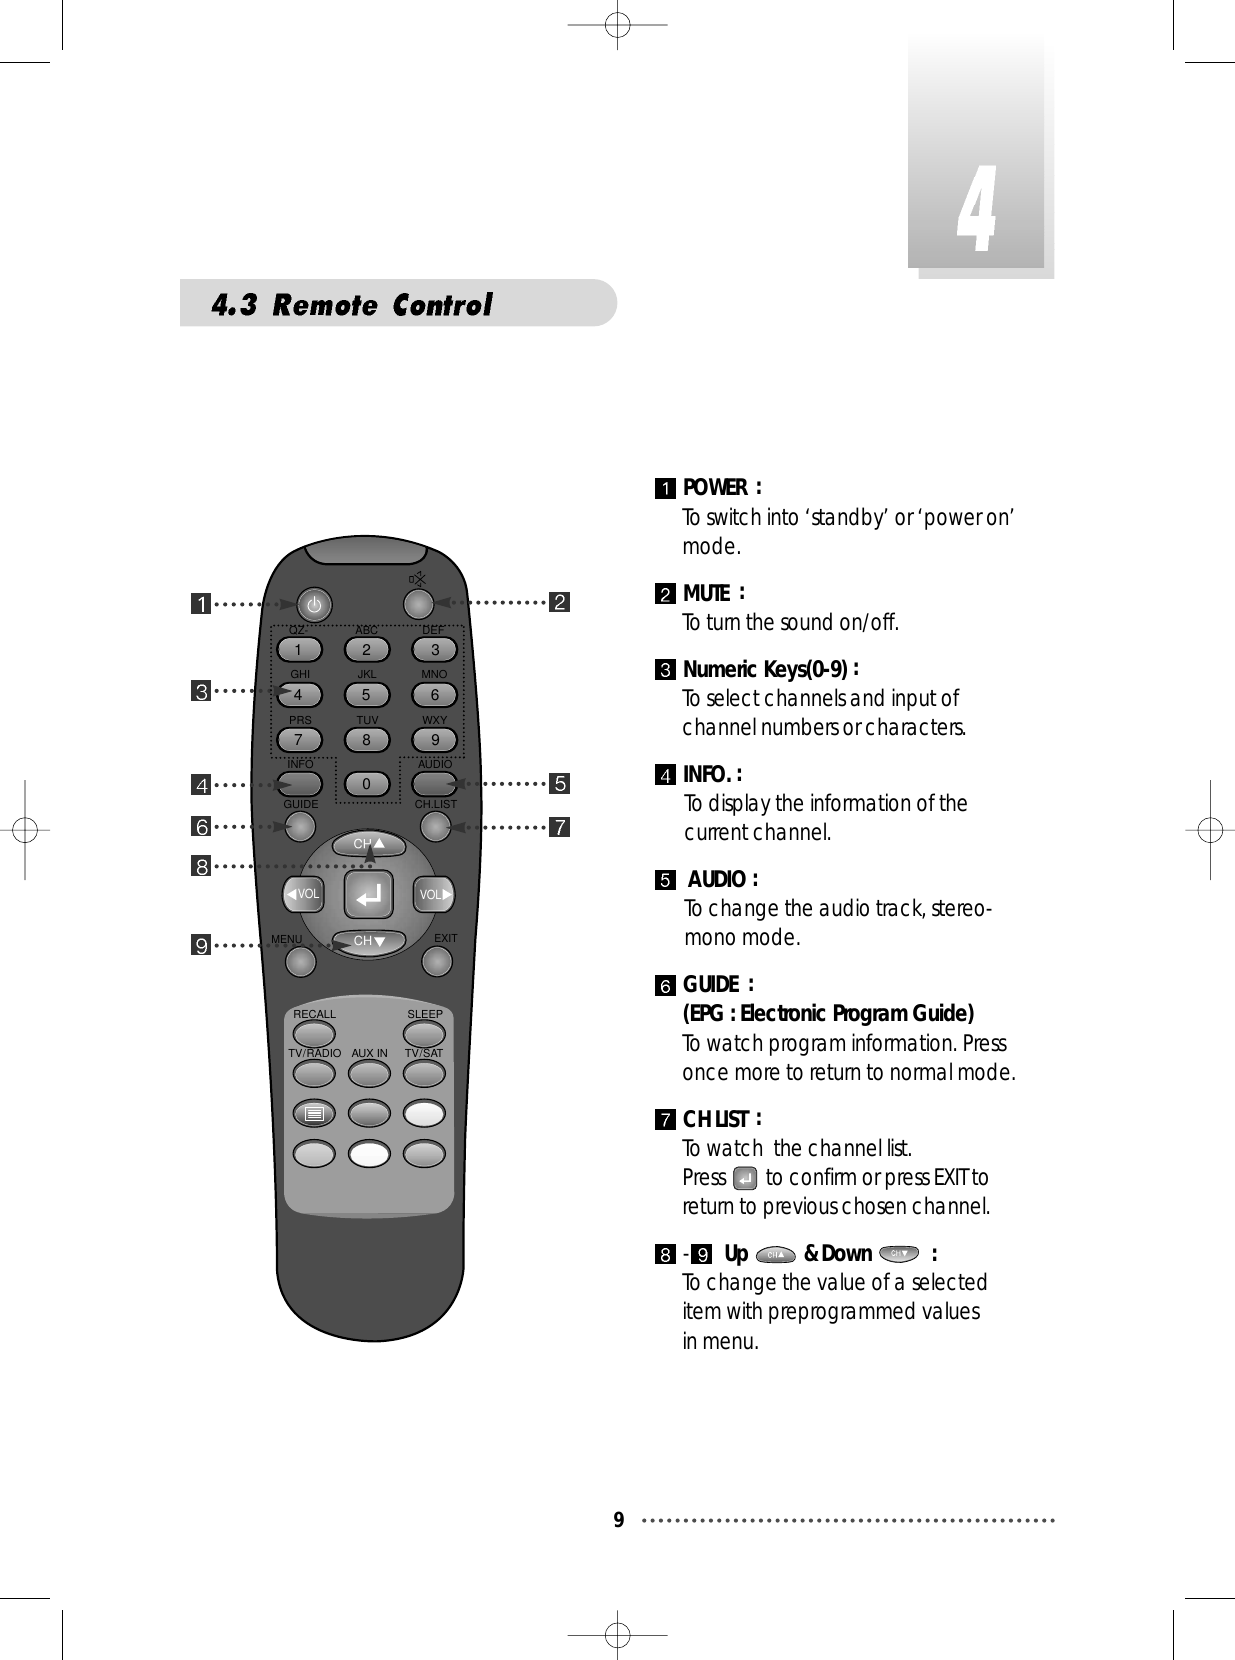 9POWER  :To switch into ‘standby’ or ‘power on’mode.MUTE  : To turn the sound on/off.Numeric Keys(0-9) : To select channels and input ofchannel numbers or characters.INFO. :To display the information of thecurrent channel.AUDIO :To change the audio track, stereo-mono mode.GUIDE  :(EPG : Electronic Program Guide)To watch program information. Pressonce more to return to normal mode.CH LIST  :To watch  the channel list. Press  to confirm or press EXIT toreturn to previous chosen channel.-Up &amp; Down  :To change the value of a selecteditem with preprogrammed values in menu. QZ-1234567809ABC DEFGHI JKL MNOPRS TUV WXYINFO AUDIOGUIDE CH.LISTMENU EXITRECALLTV/RADIO AUX IN TV/SATSLEEPVOLCHVOLCH